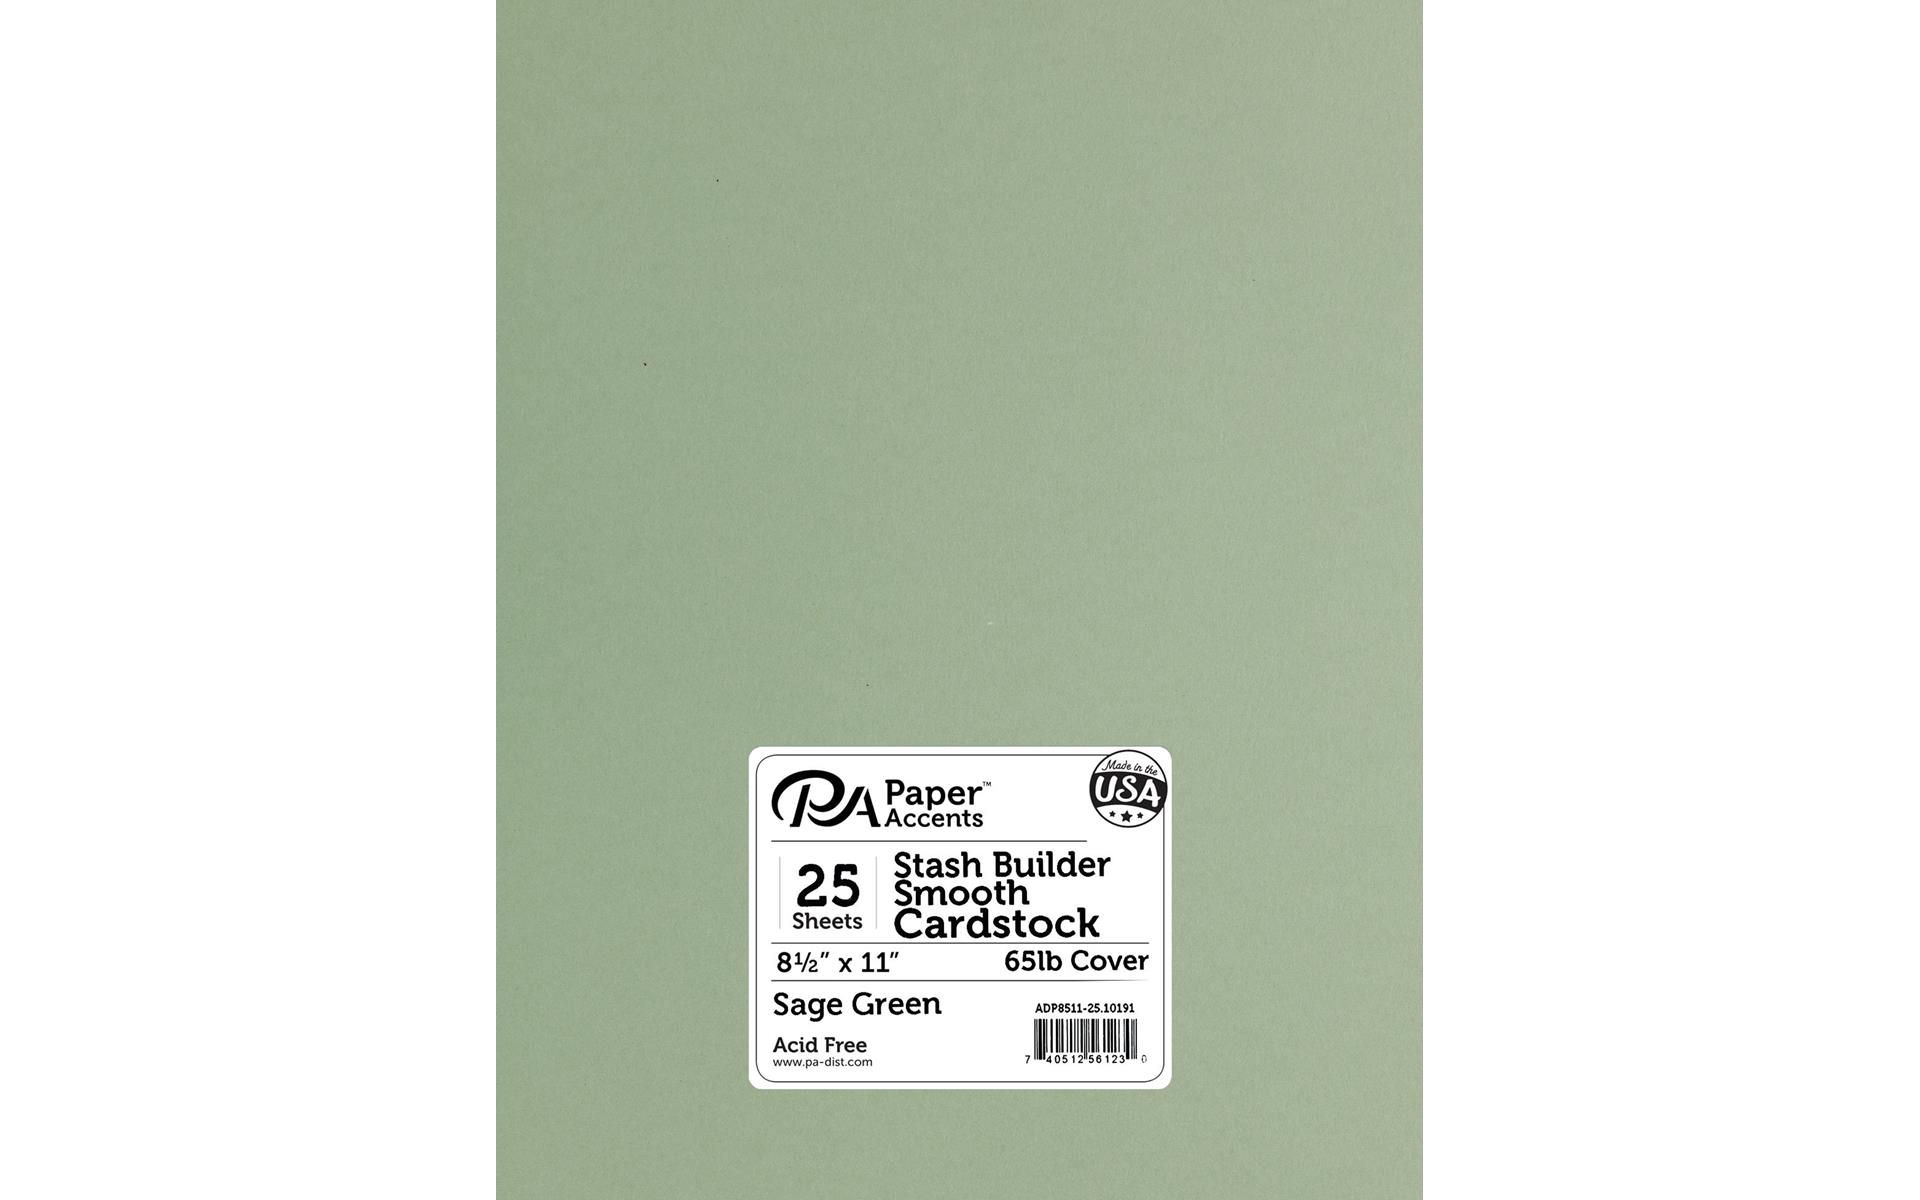 PA Paper Accents Stash Builder Cardstock Pack 8.5 x 11 Sage Green, 65lb  colored cardstock paper for card making, scrapbooking, printing, quilling